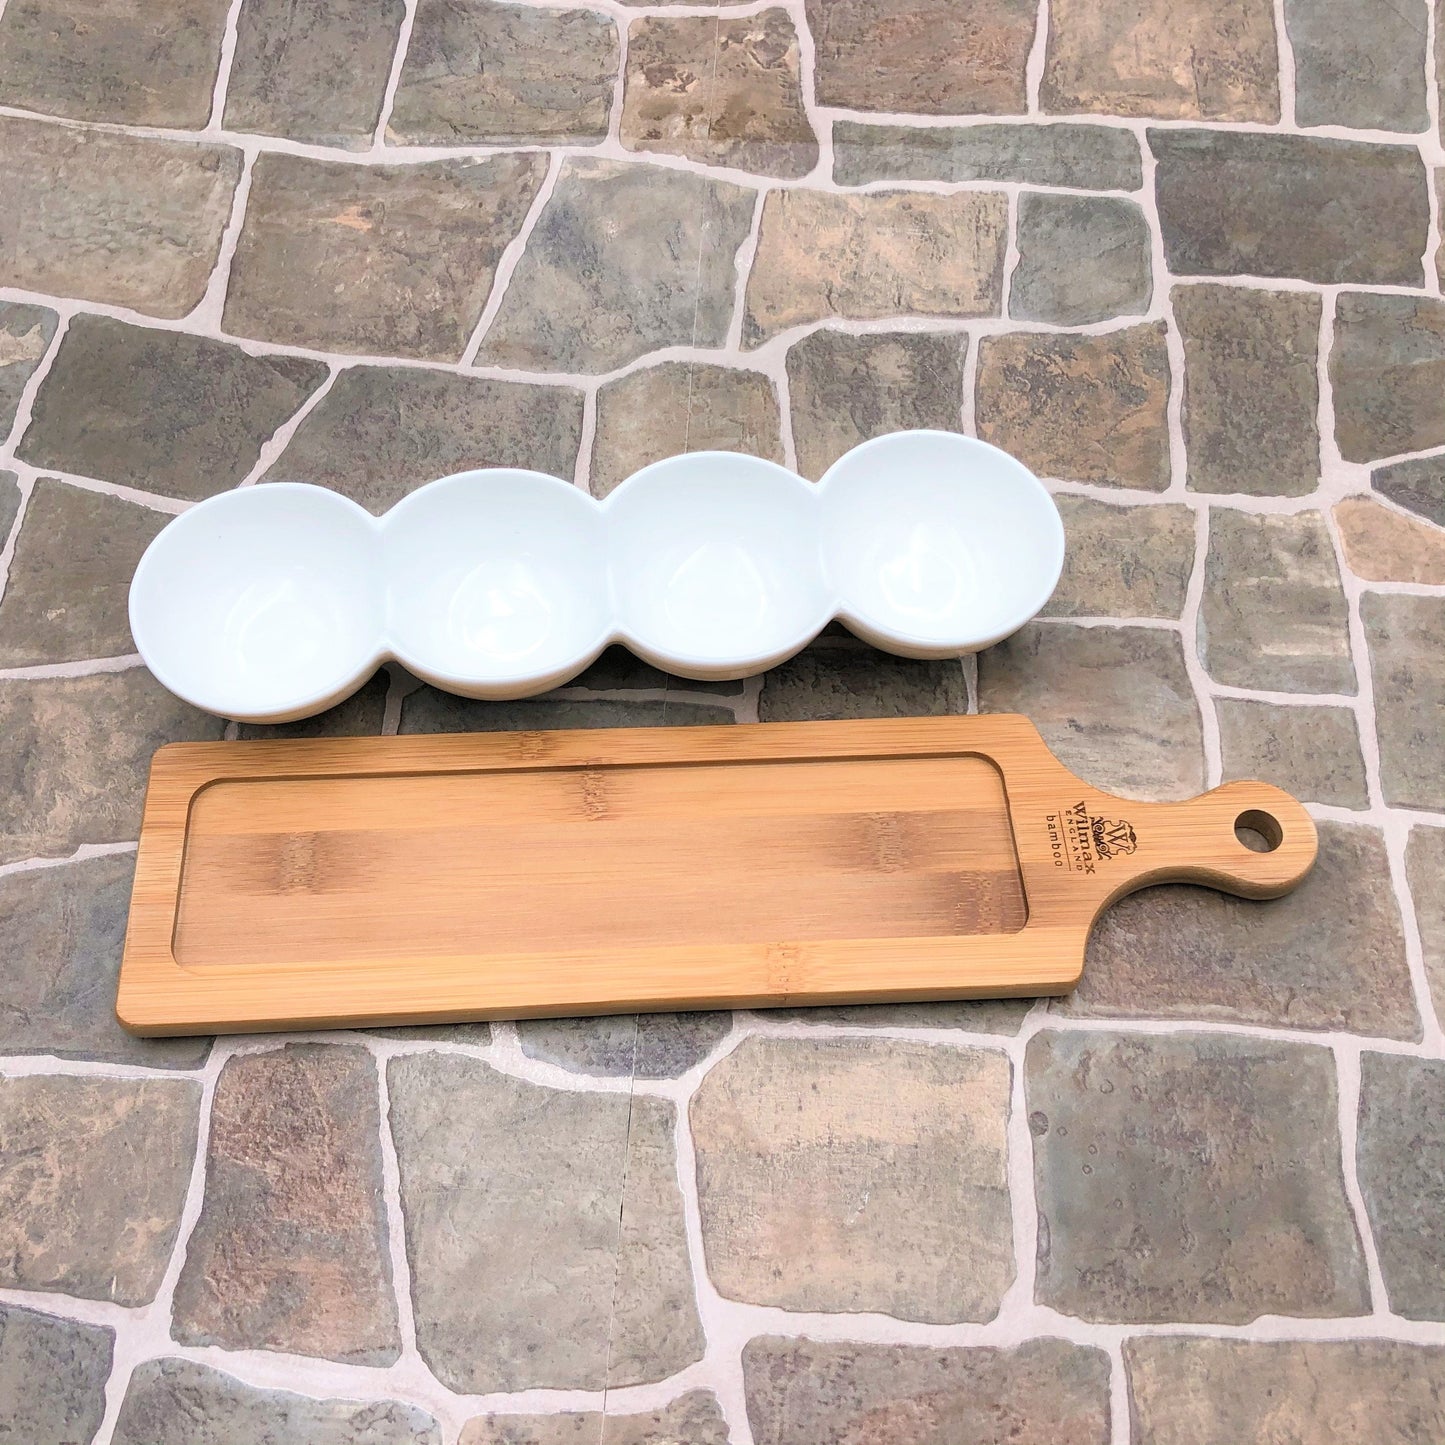 Fine Porcelain Centipede 4 Section Dish With Bamboo Serving Tray To Match-1